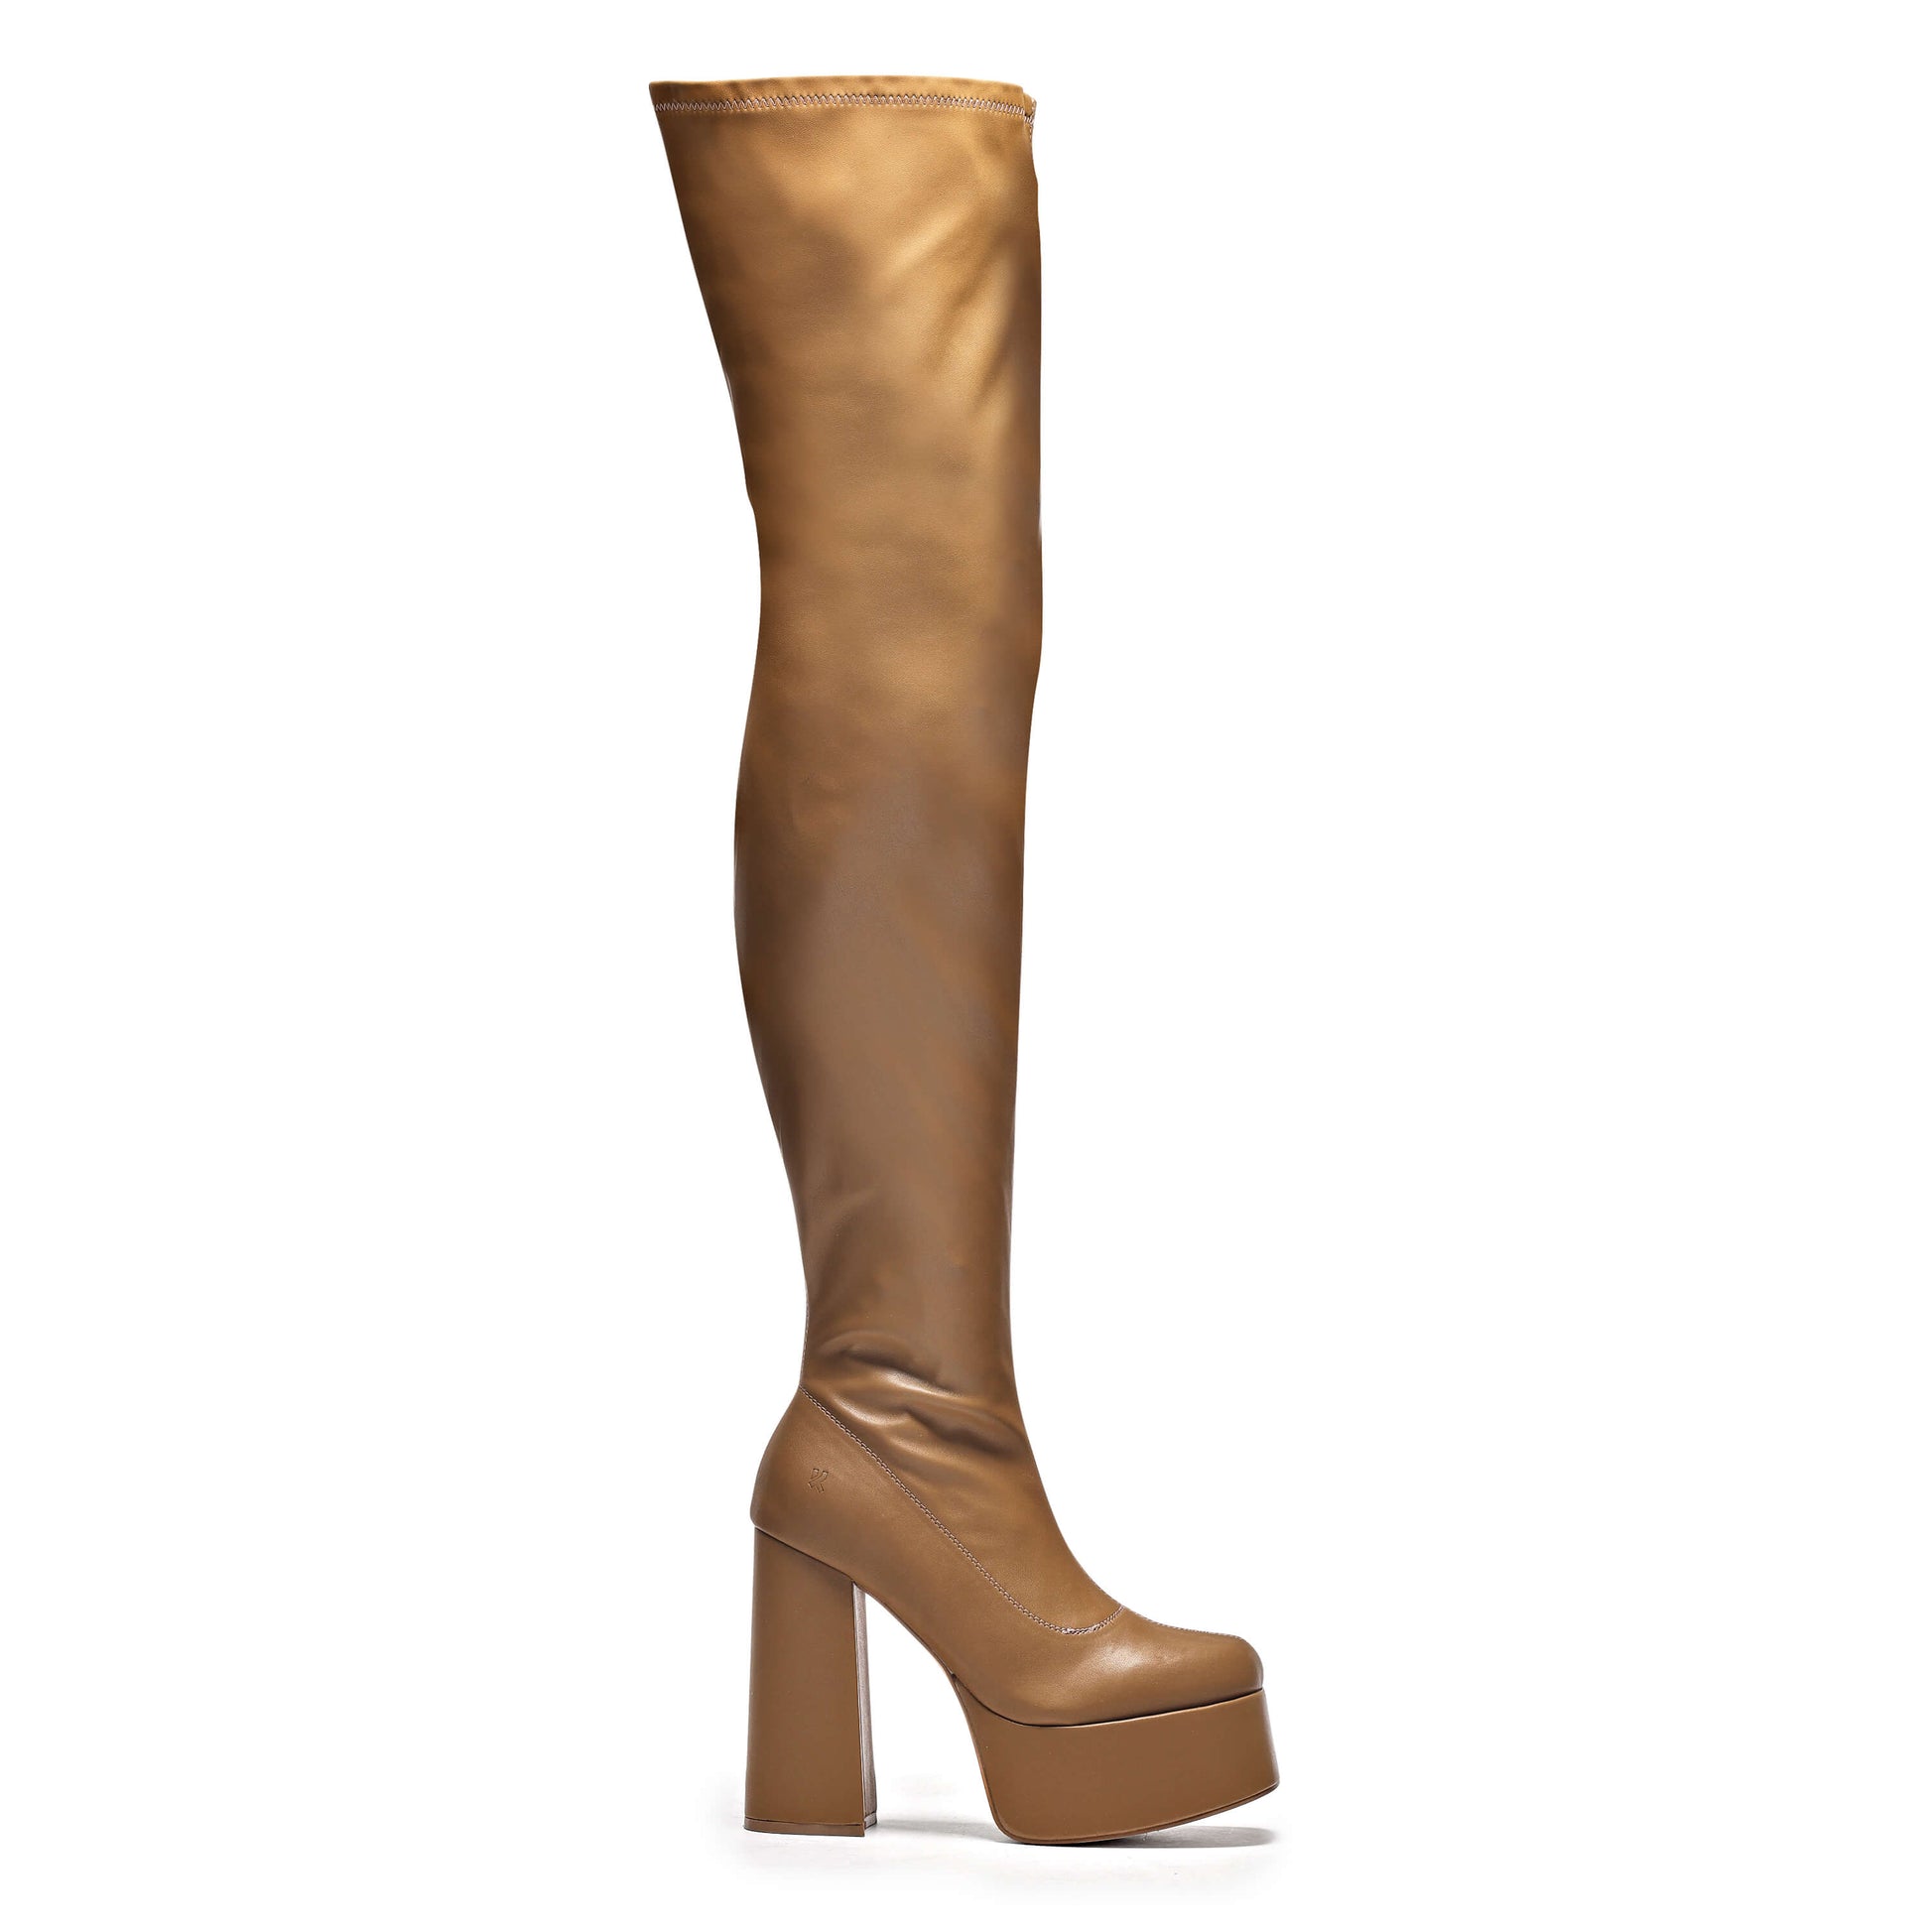 The Redemption Stretch Thigh High Boots - Khaki - Long Boots - KOI Footwear - Khaki - Side View